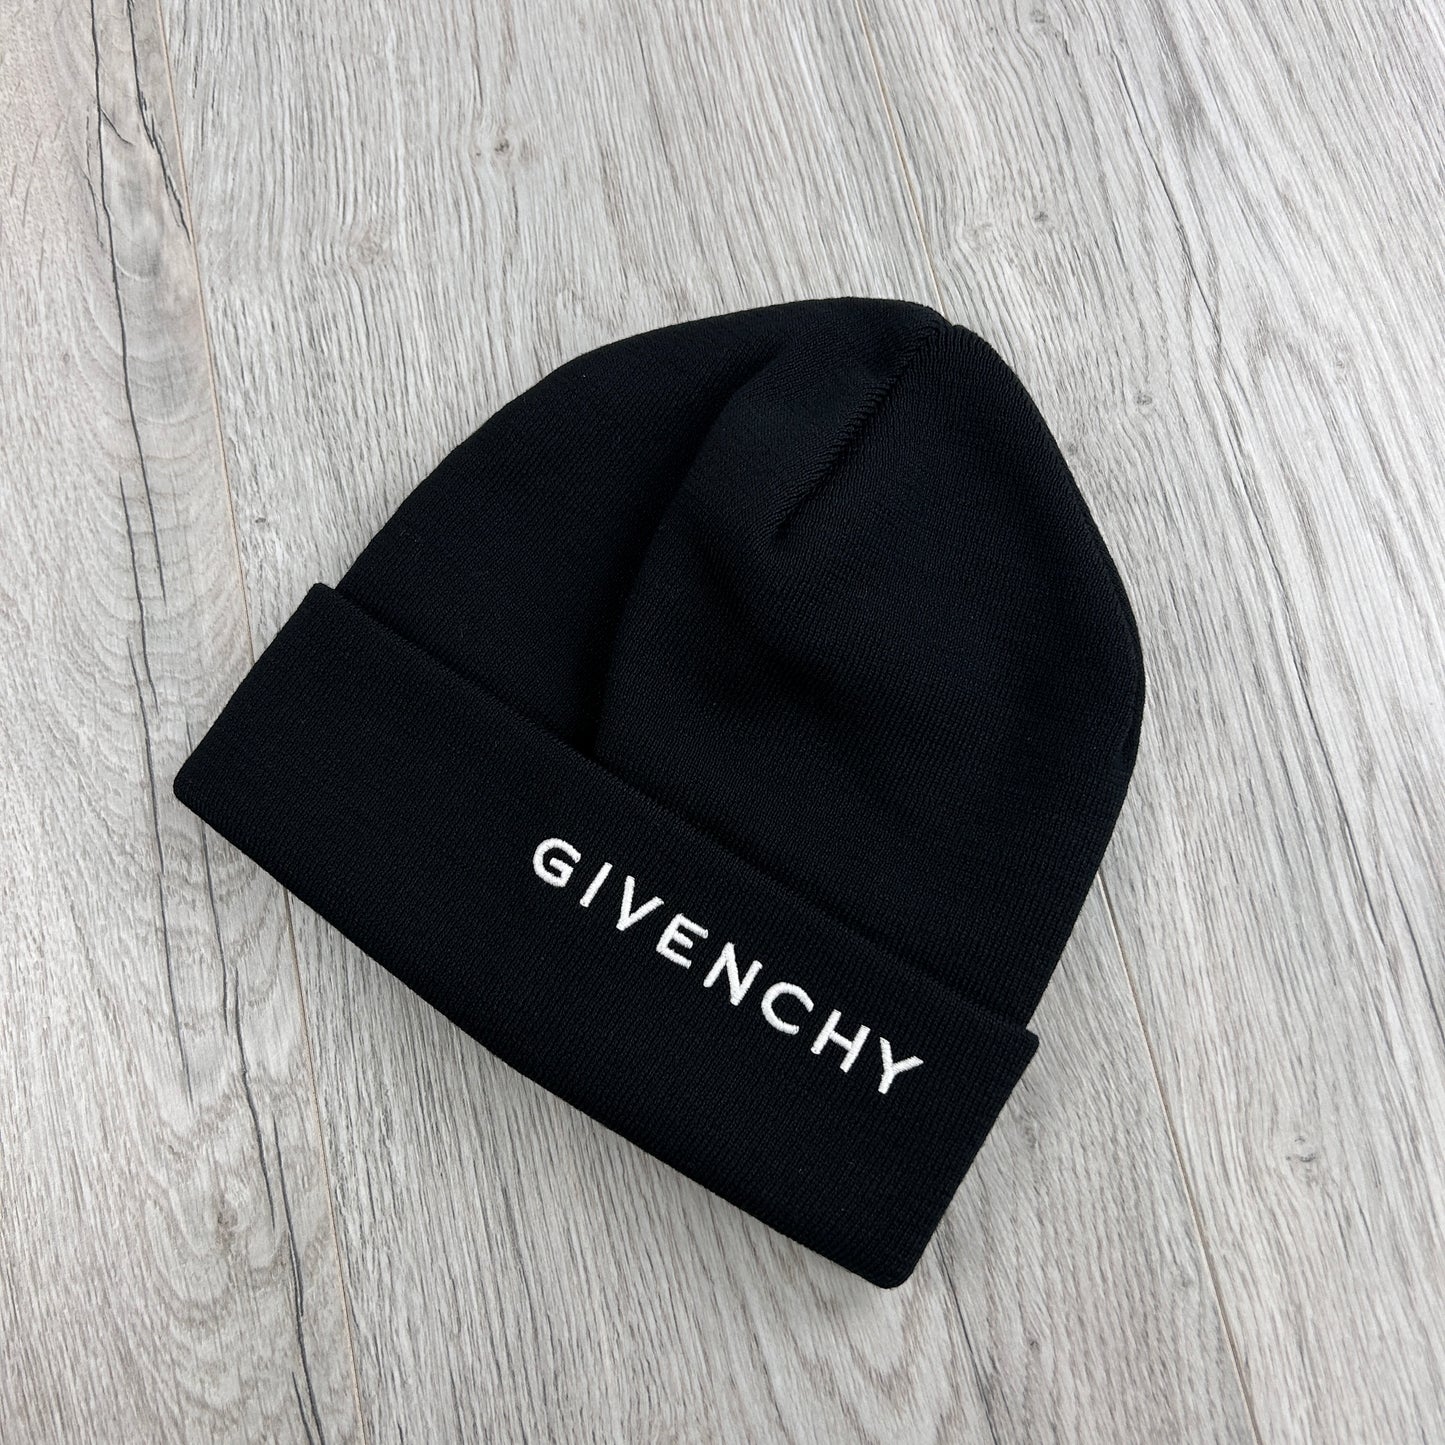 Givenchy Men’s Black Embroidered Logo Beanie